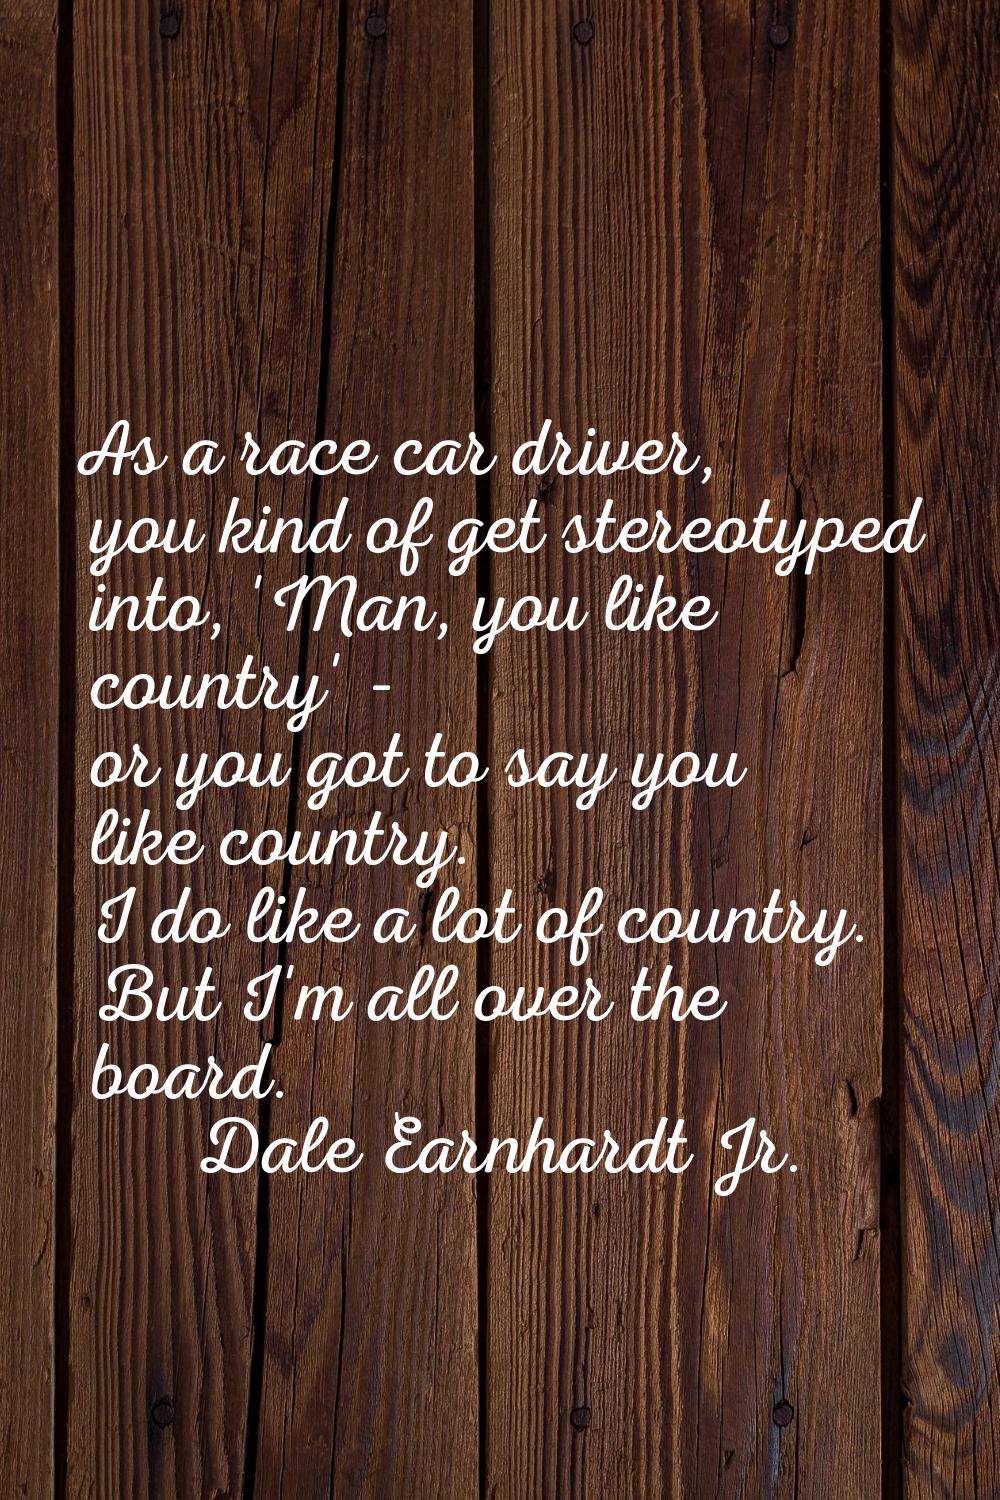 As a race car driver, you kind of get stereotyped into, 'Man, you like country' - or you got to say